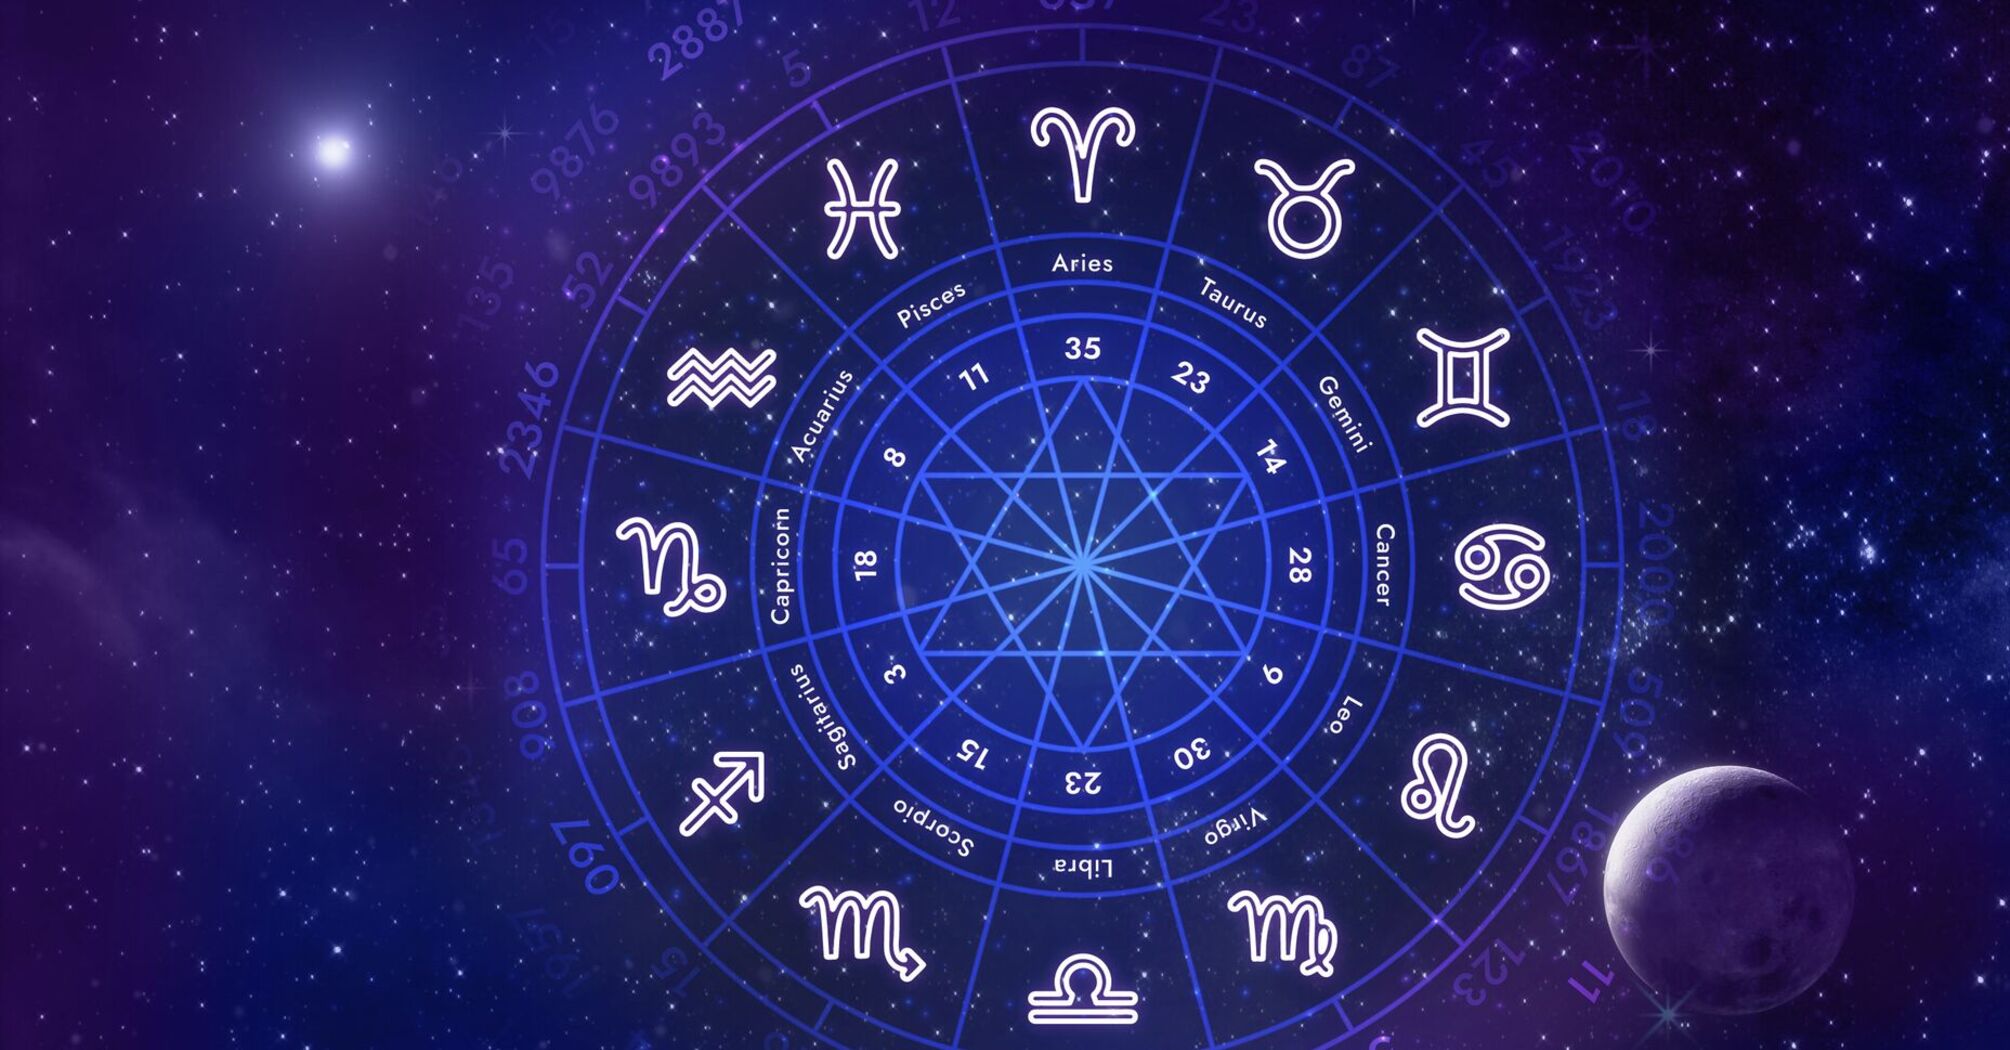 Horoscope for the 12 signs of the zodiac